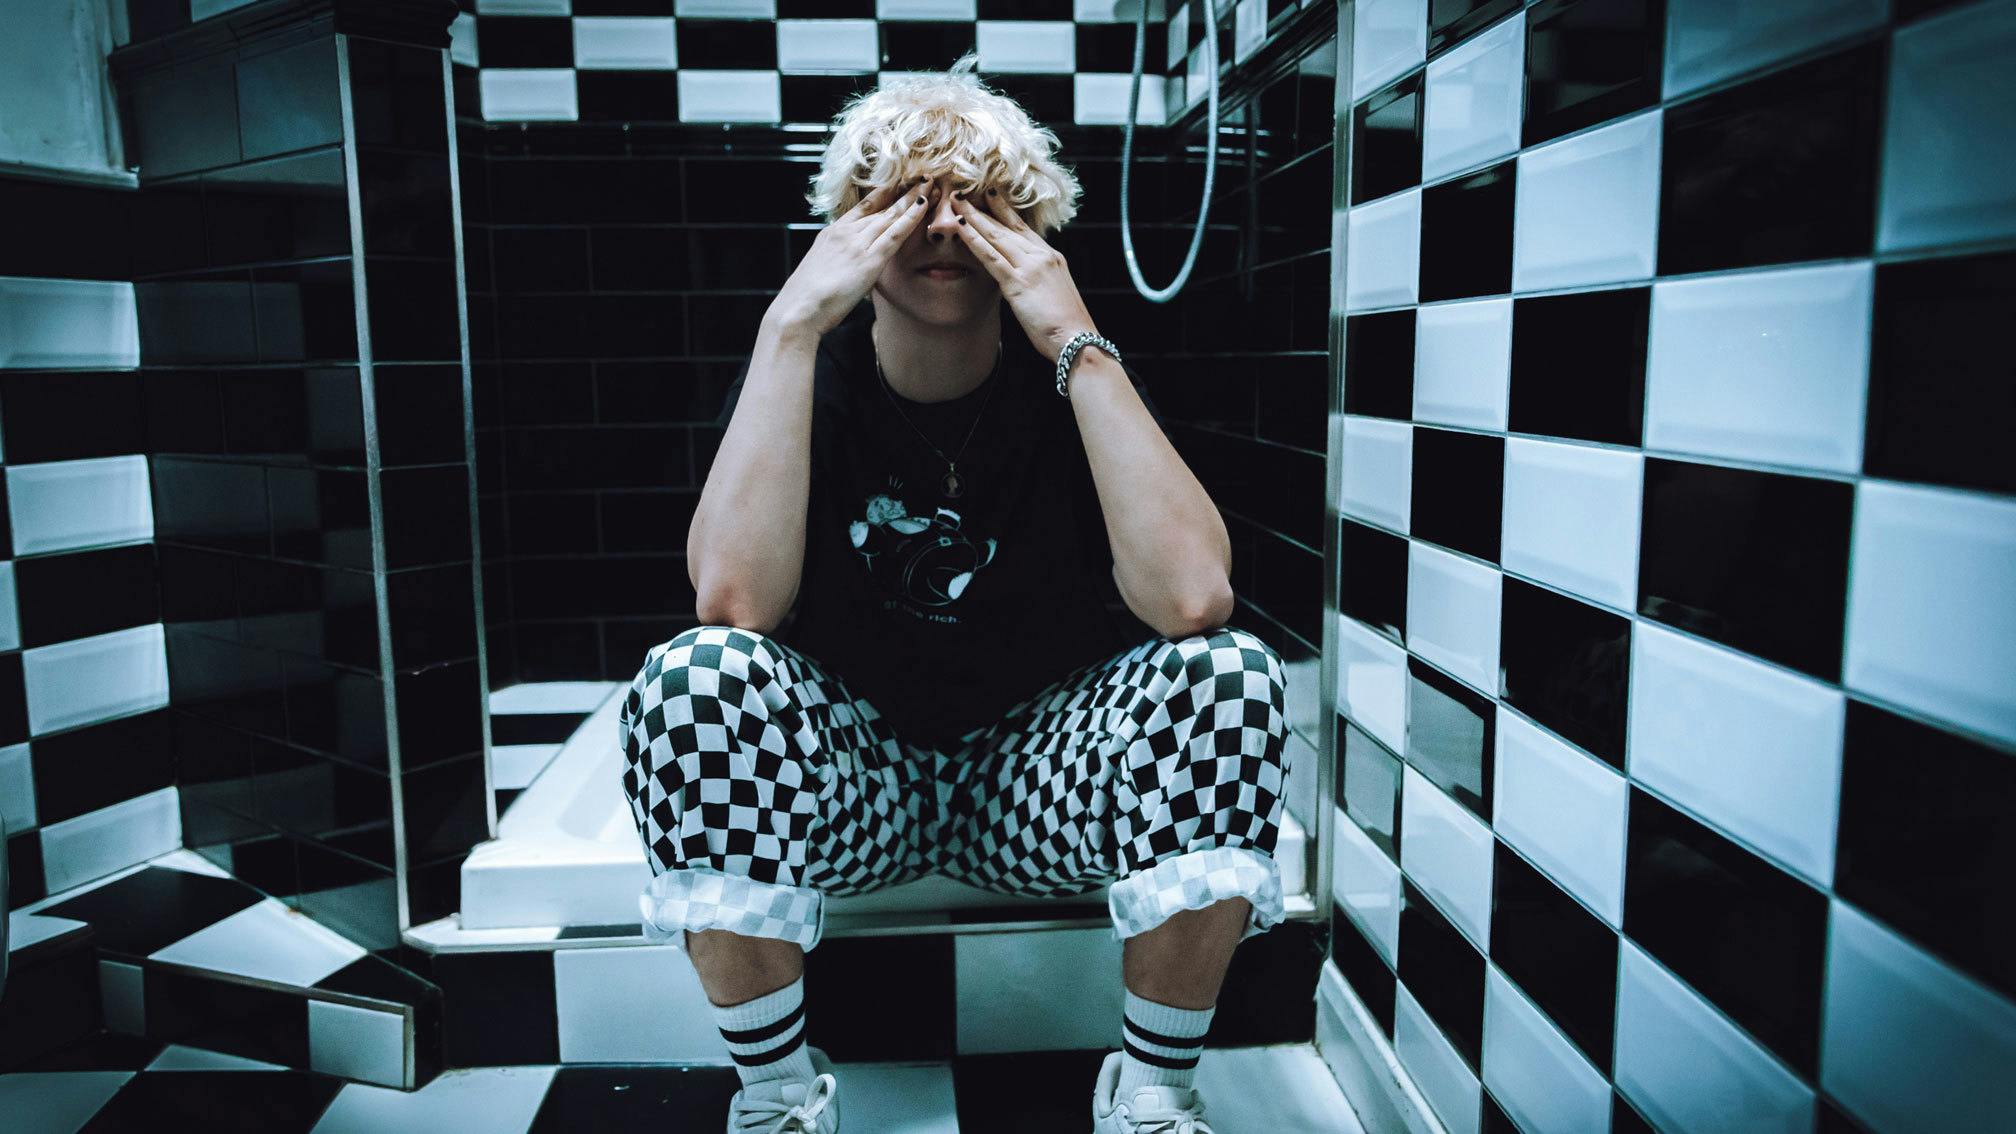 Listen to NOAHFINNCE’s angsty new single I KNOW BETTER